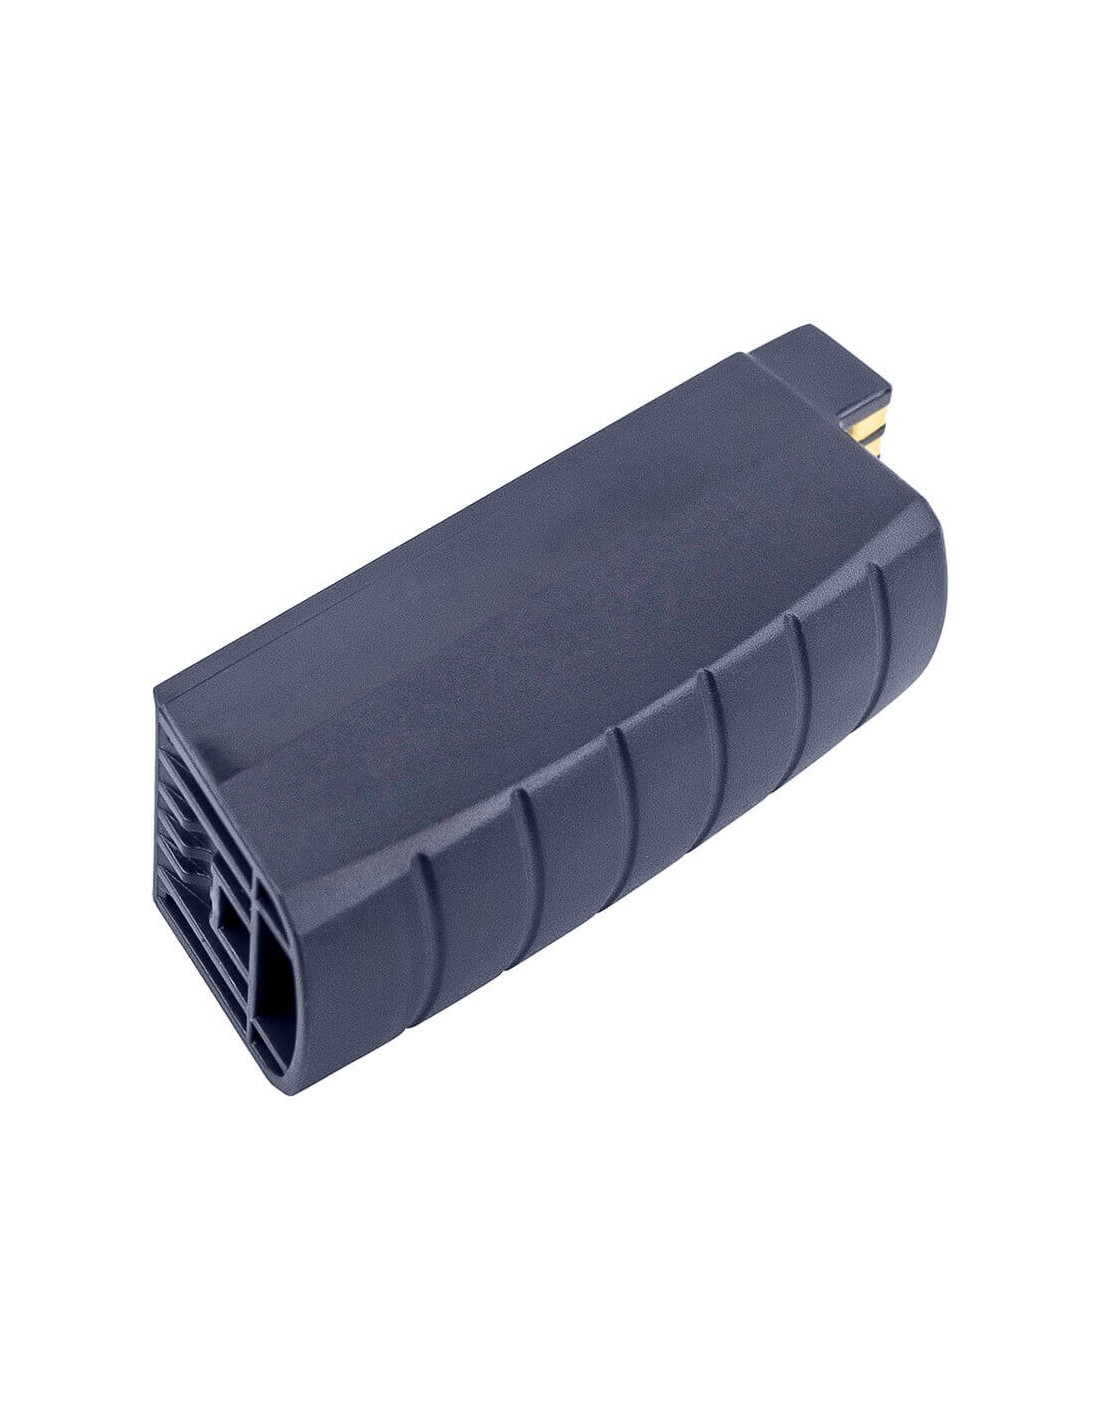 Battery for Vocollect, A700, A710, A720 3.7V, 2500mAh - 9.25Wh